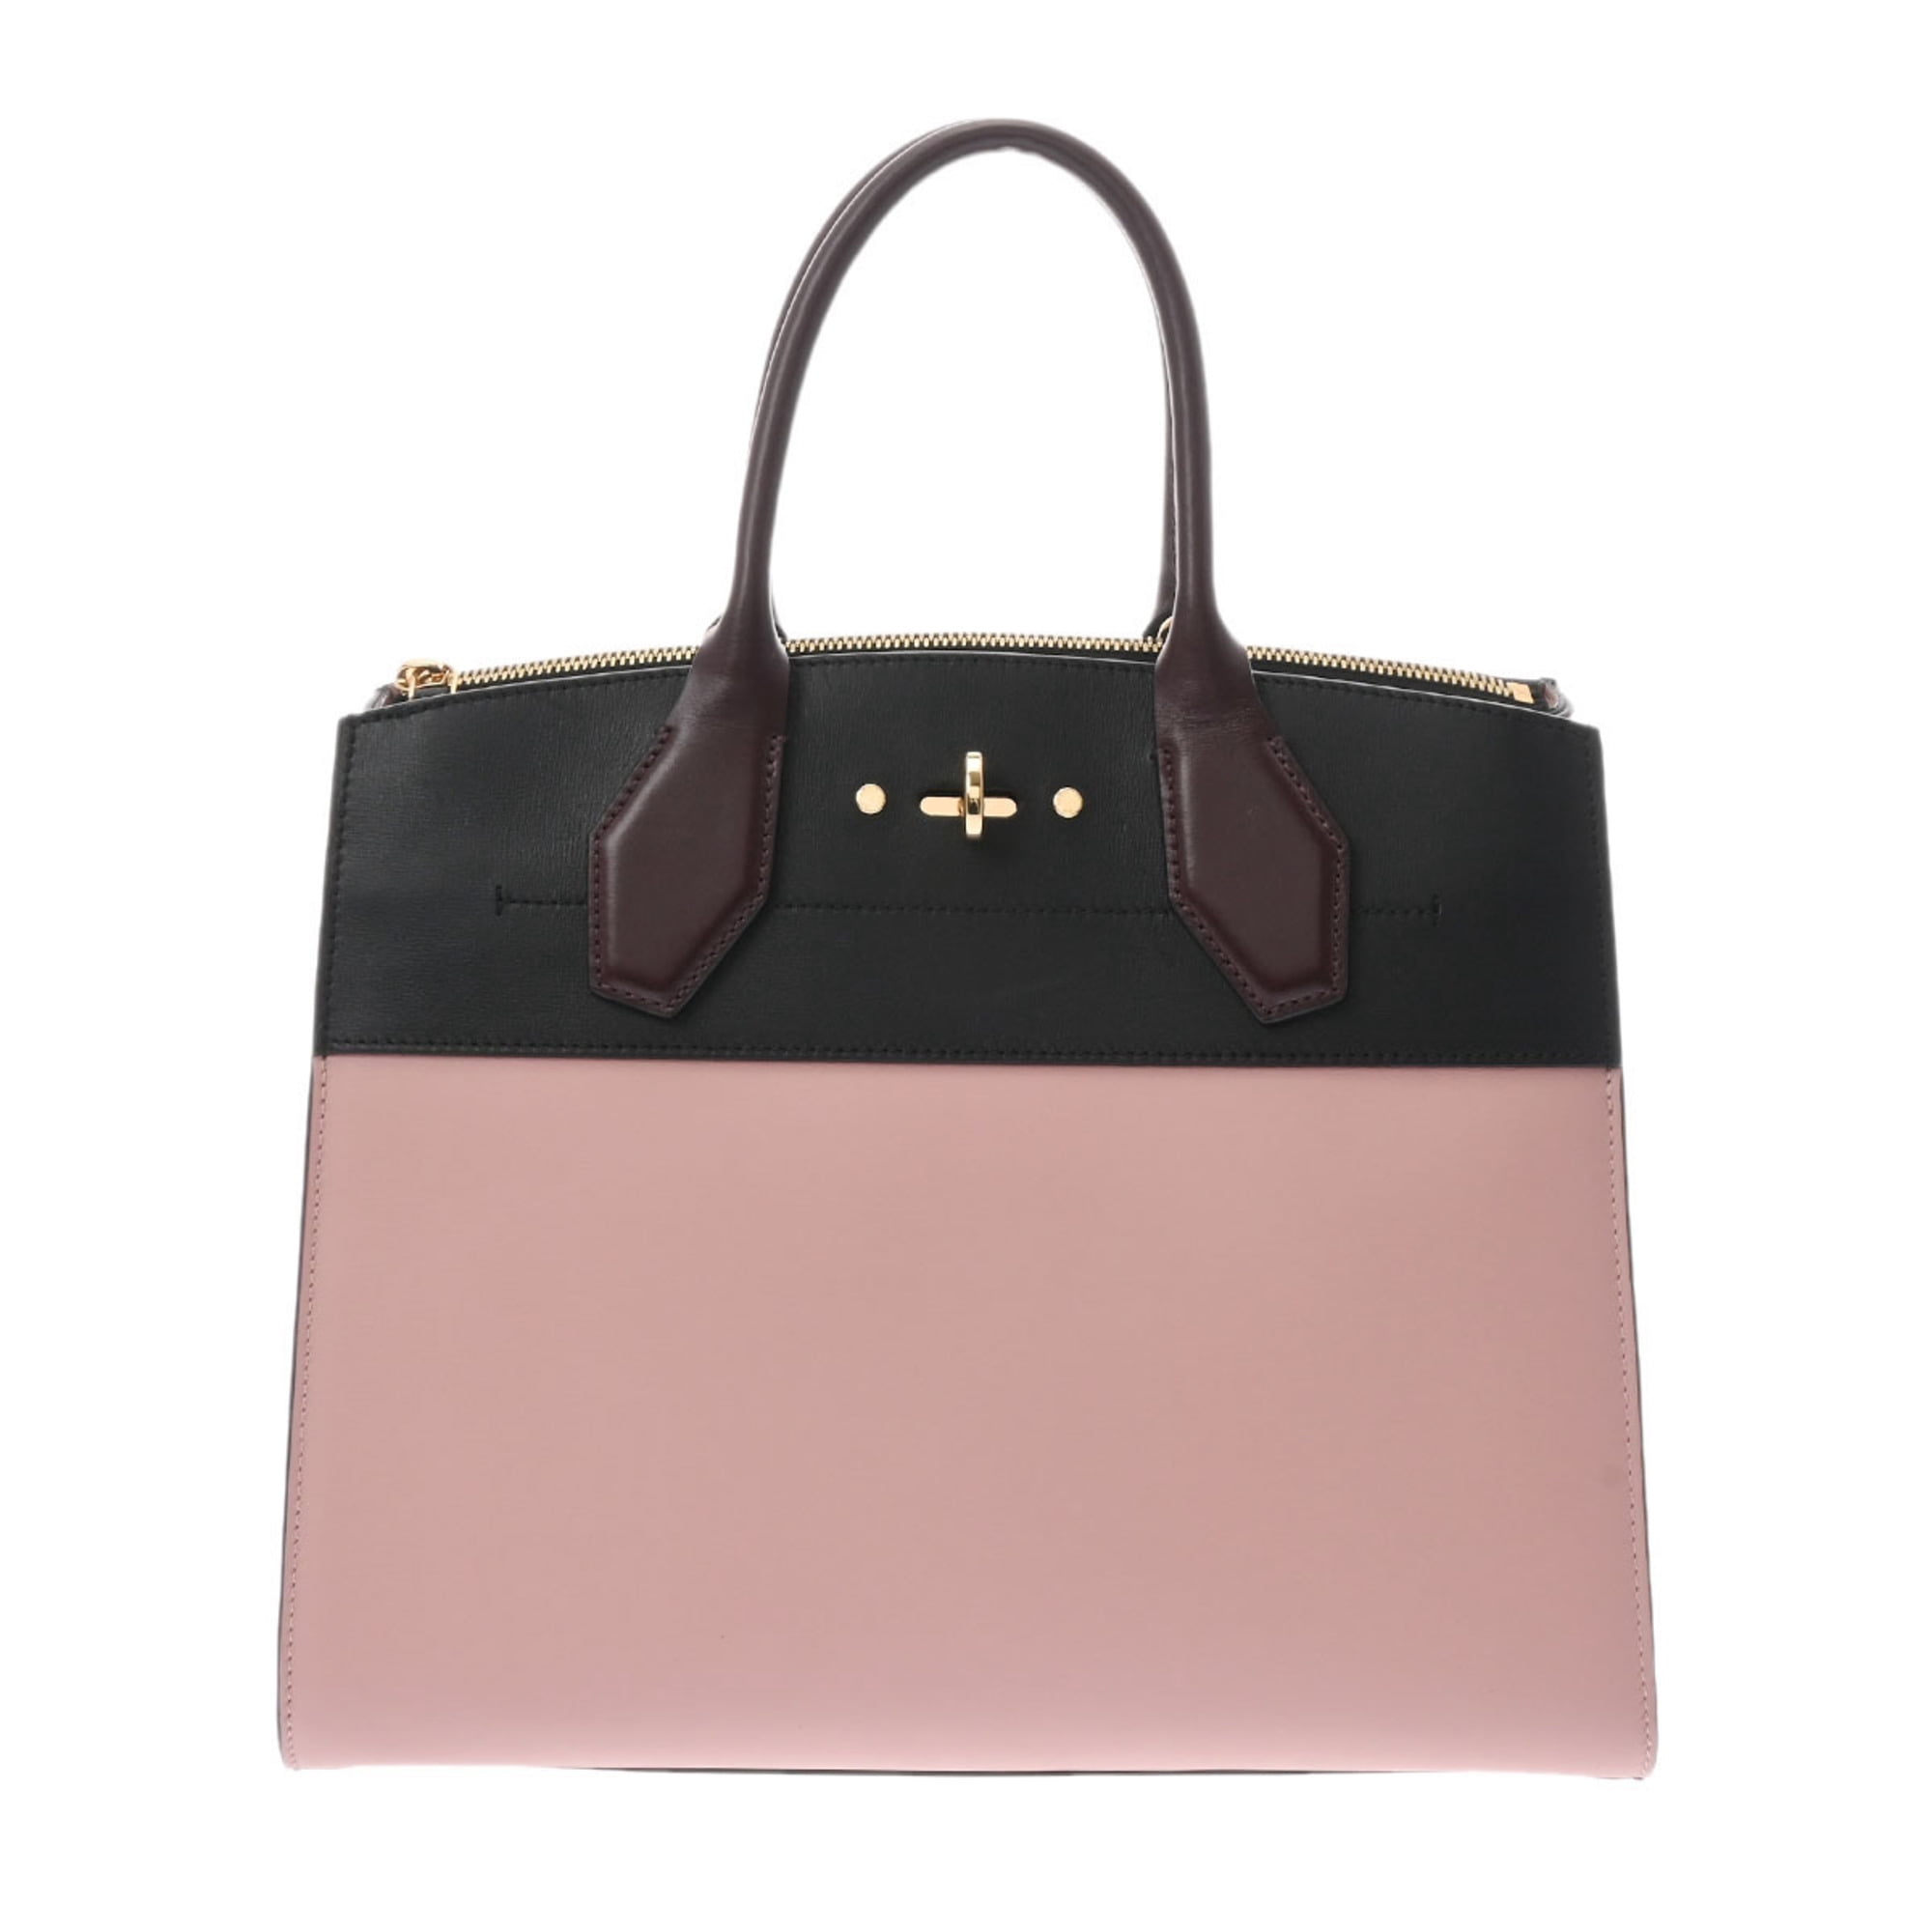 City Steamer leather tote